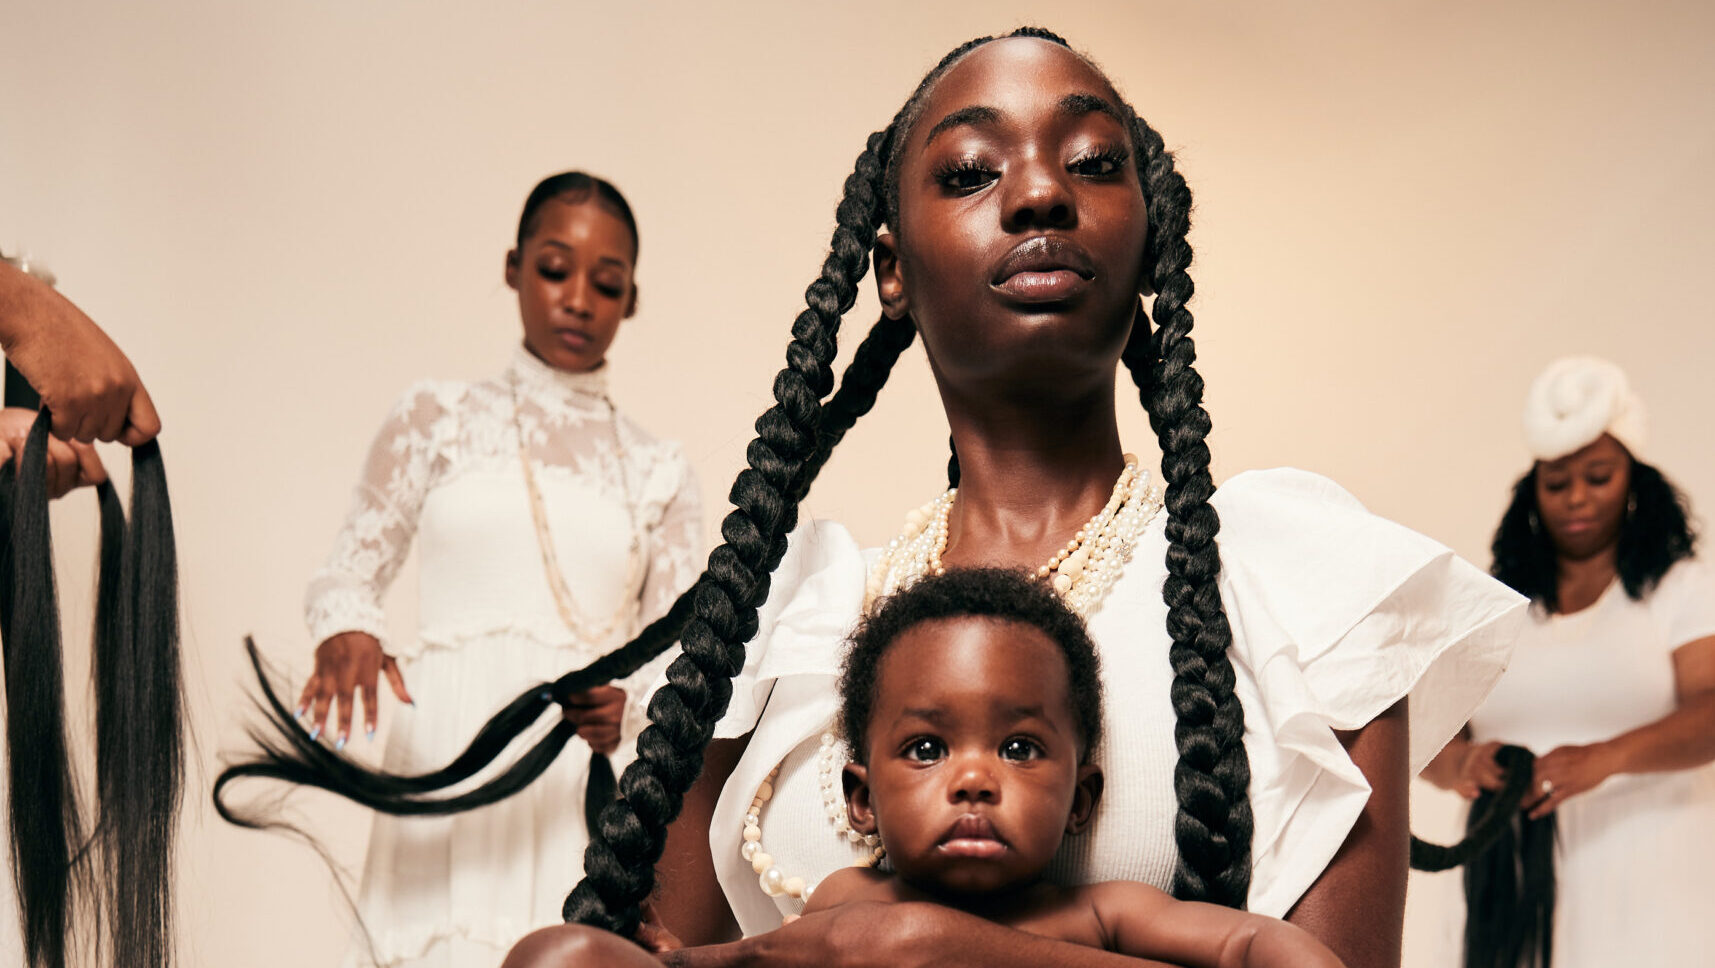 A Black woman with incredibly long braids holds a baby in a photo studio. Behind her stands two women who are holding and braiding the main subject's long hair.